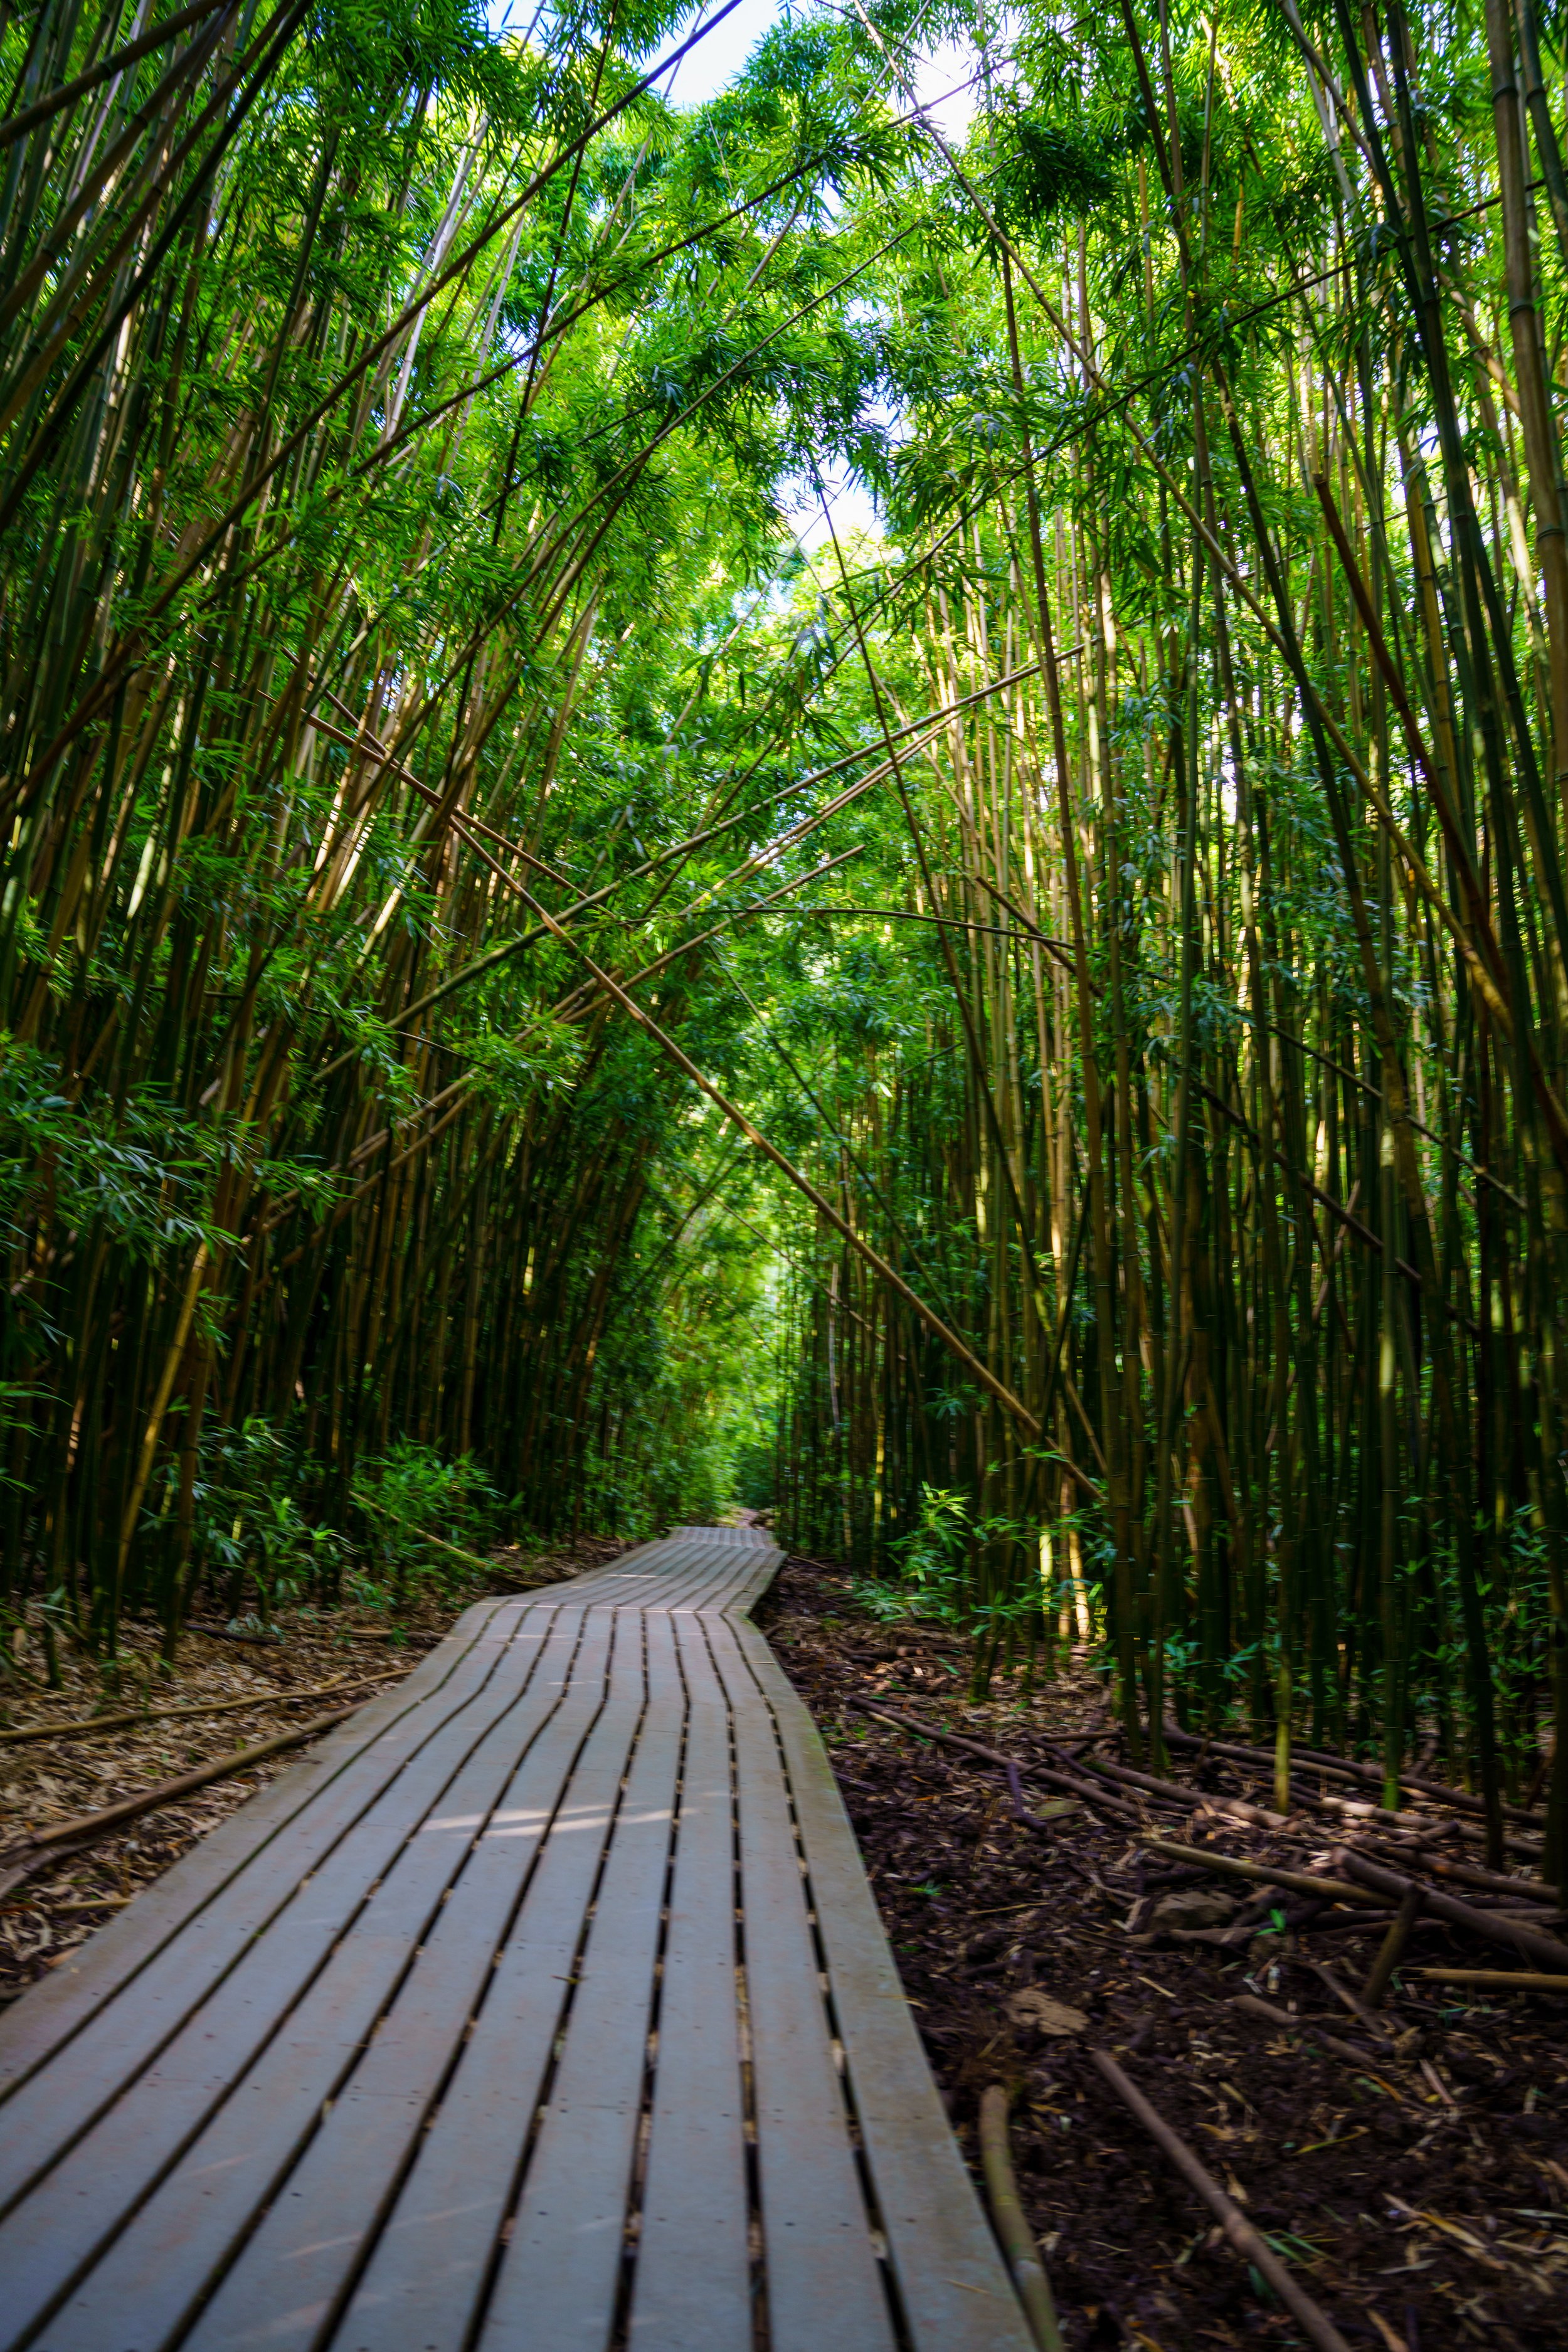  A moment of peace in the bamboo forest 